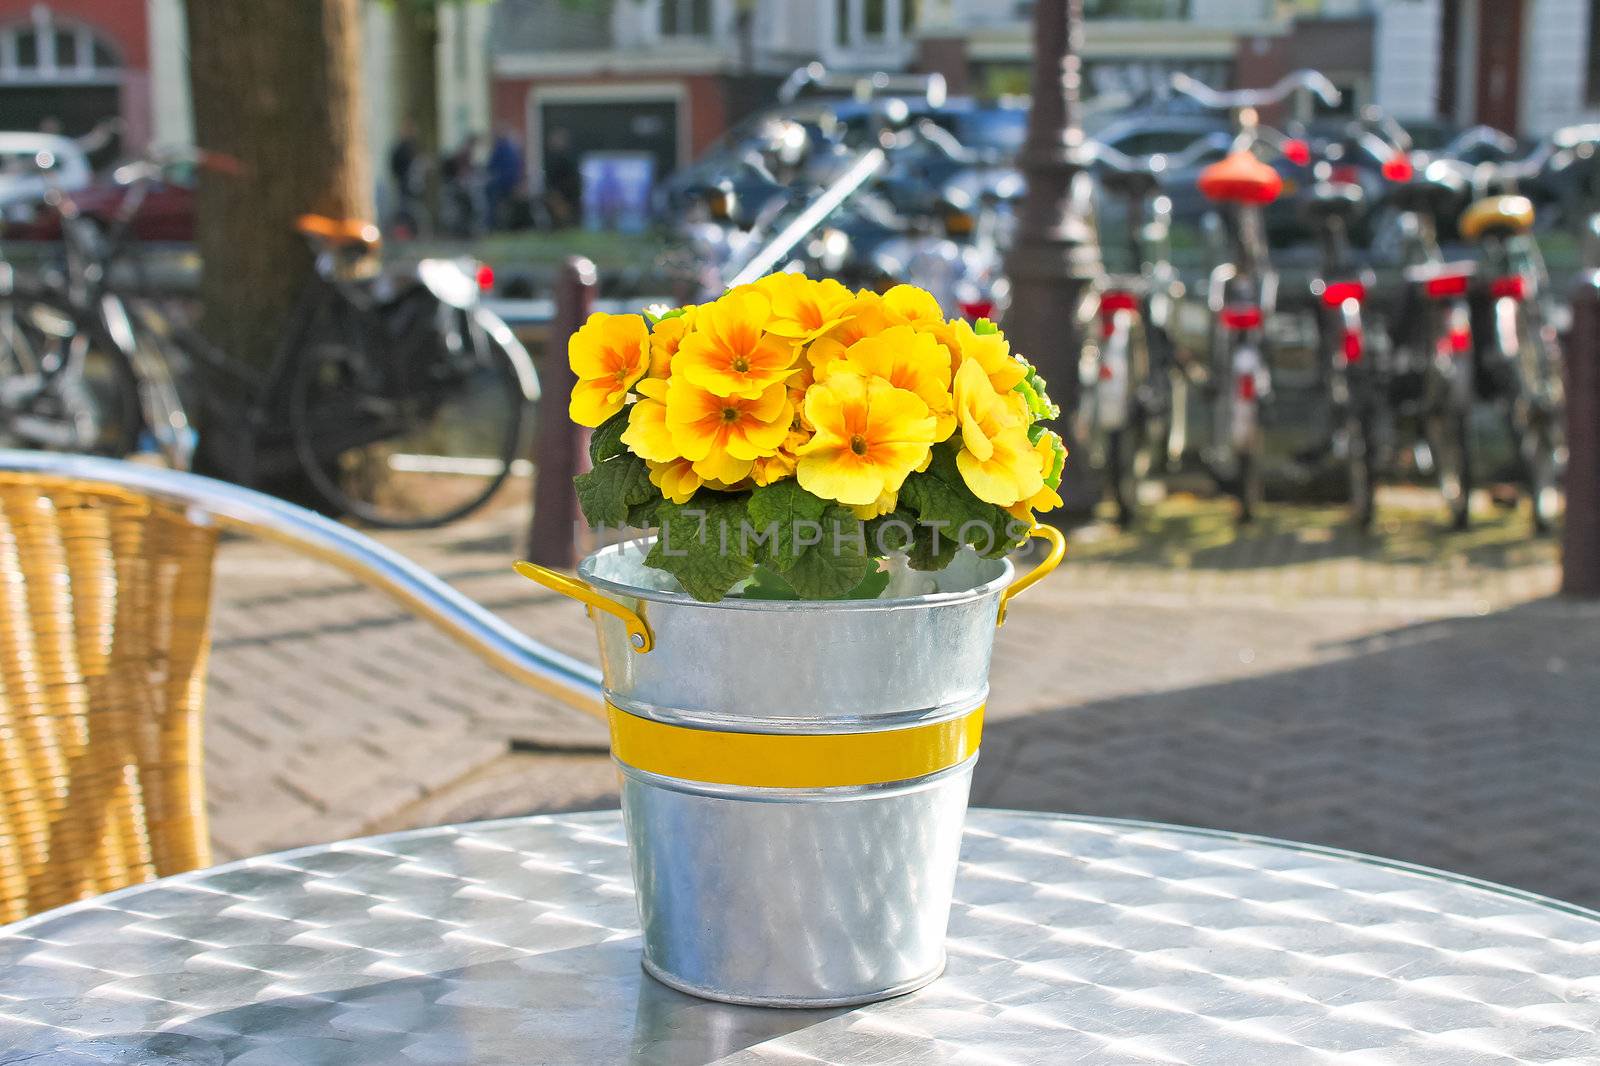 Flowers on a table in street cafe in Amsterdam. Netherlands